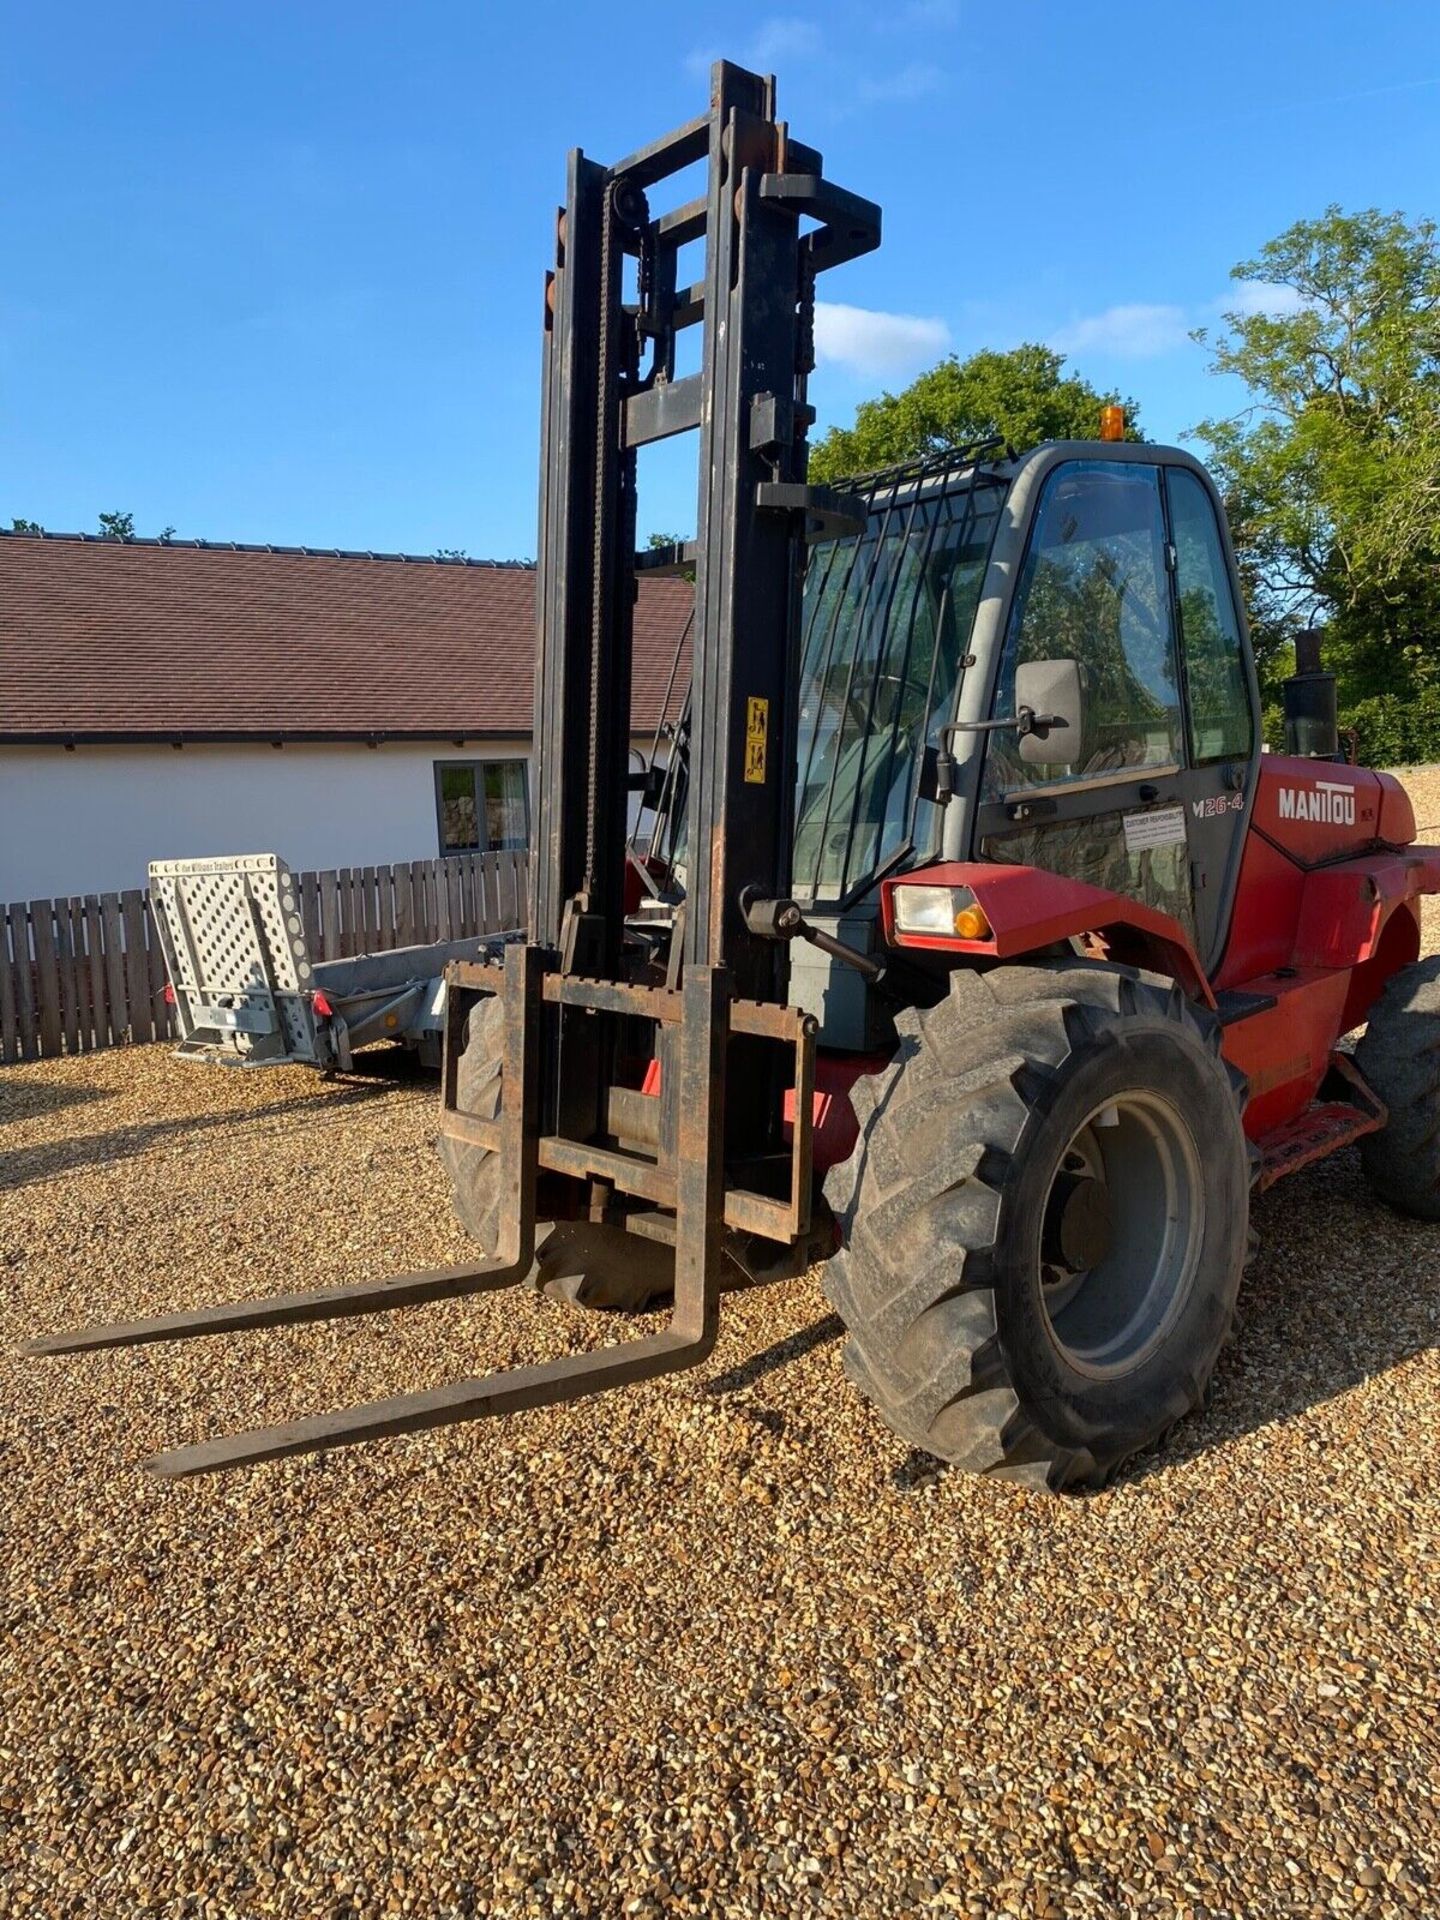 2010 MANITOU M26-4: ROBUST, WELL-MAINTAINED FORKLIFT - Image 5 of 12